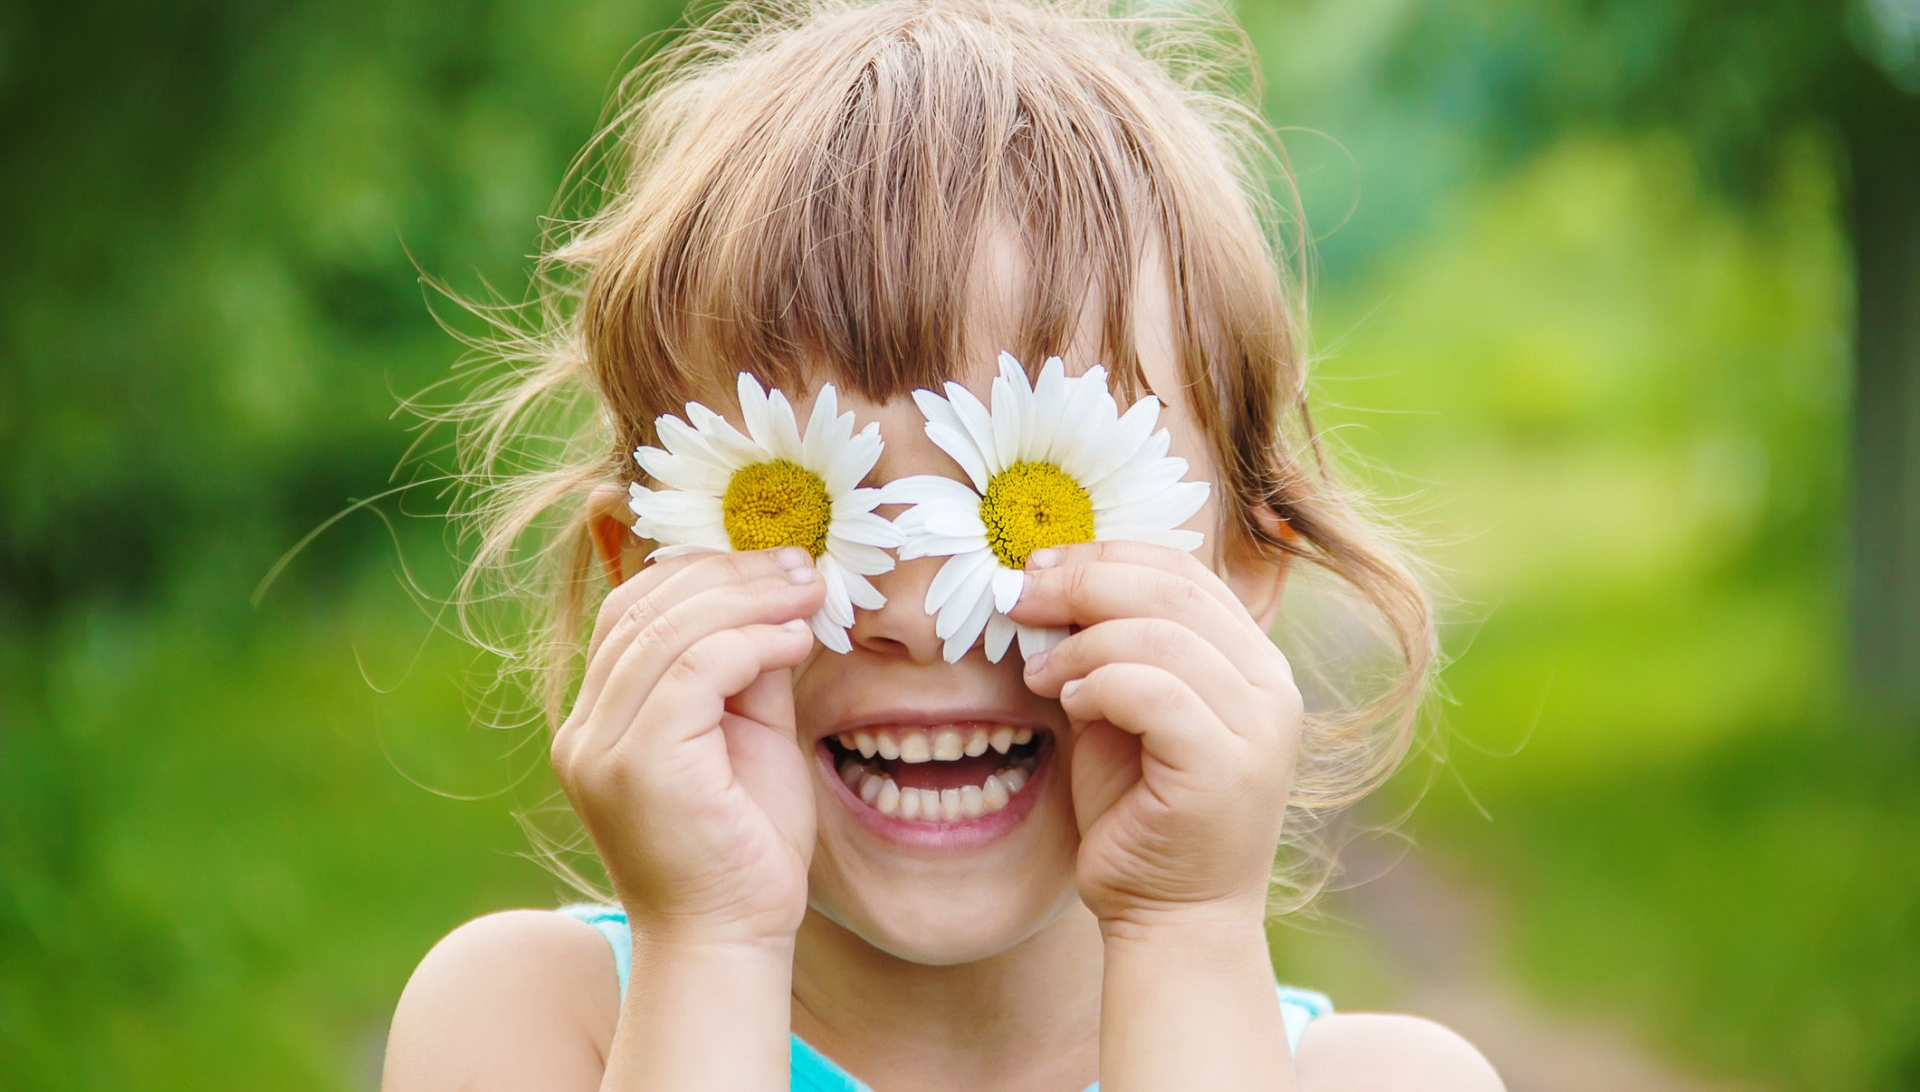 young girl smiling, holding two daisies in front of her eyes